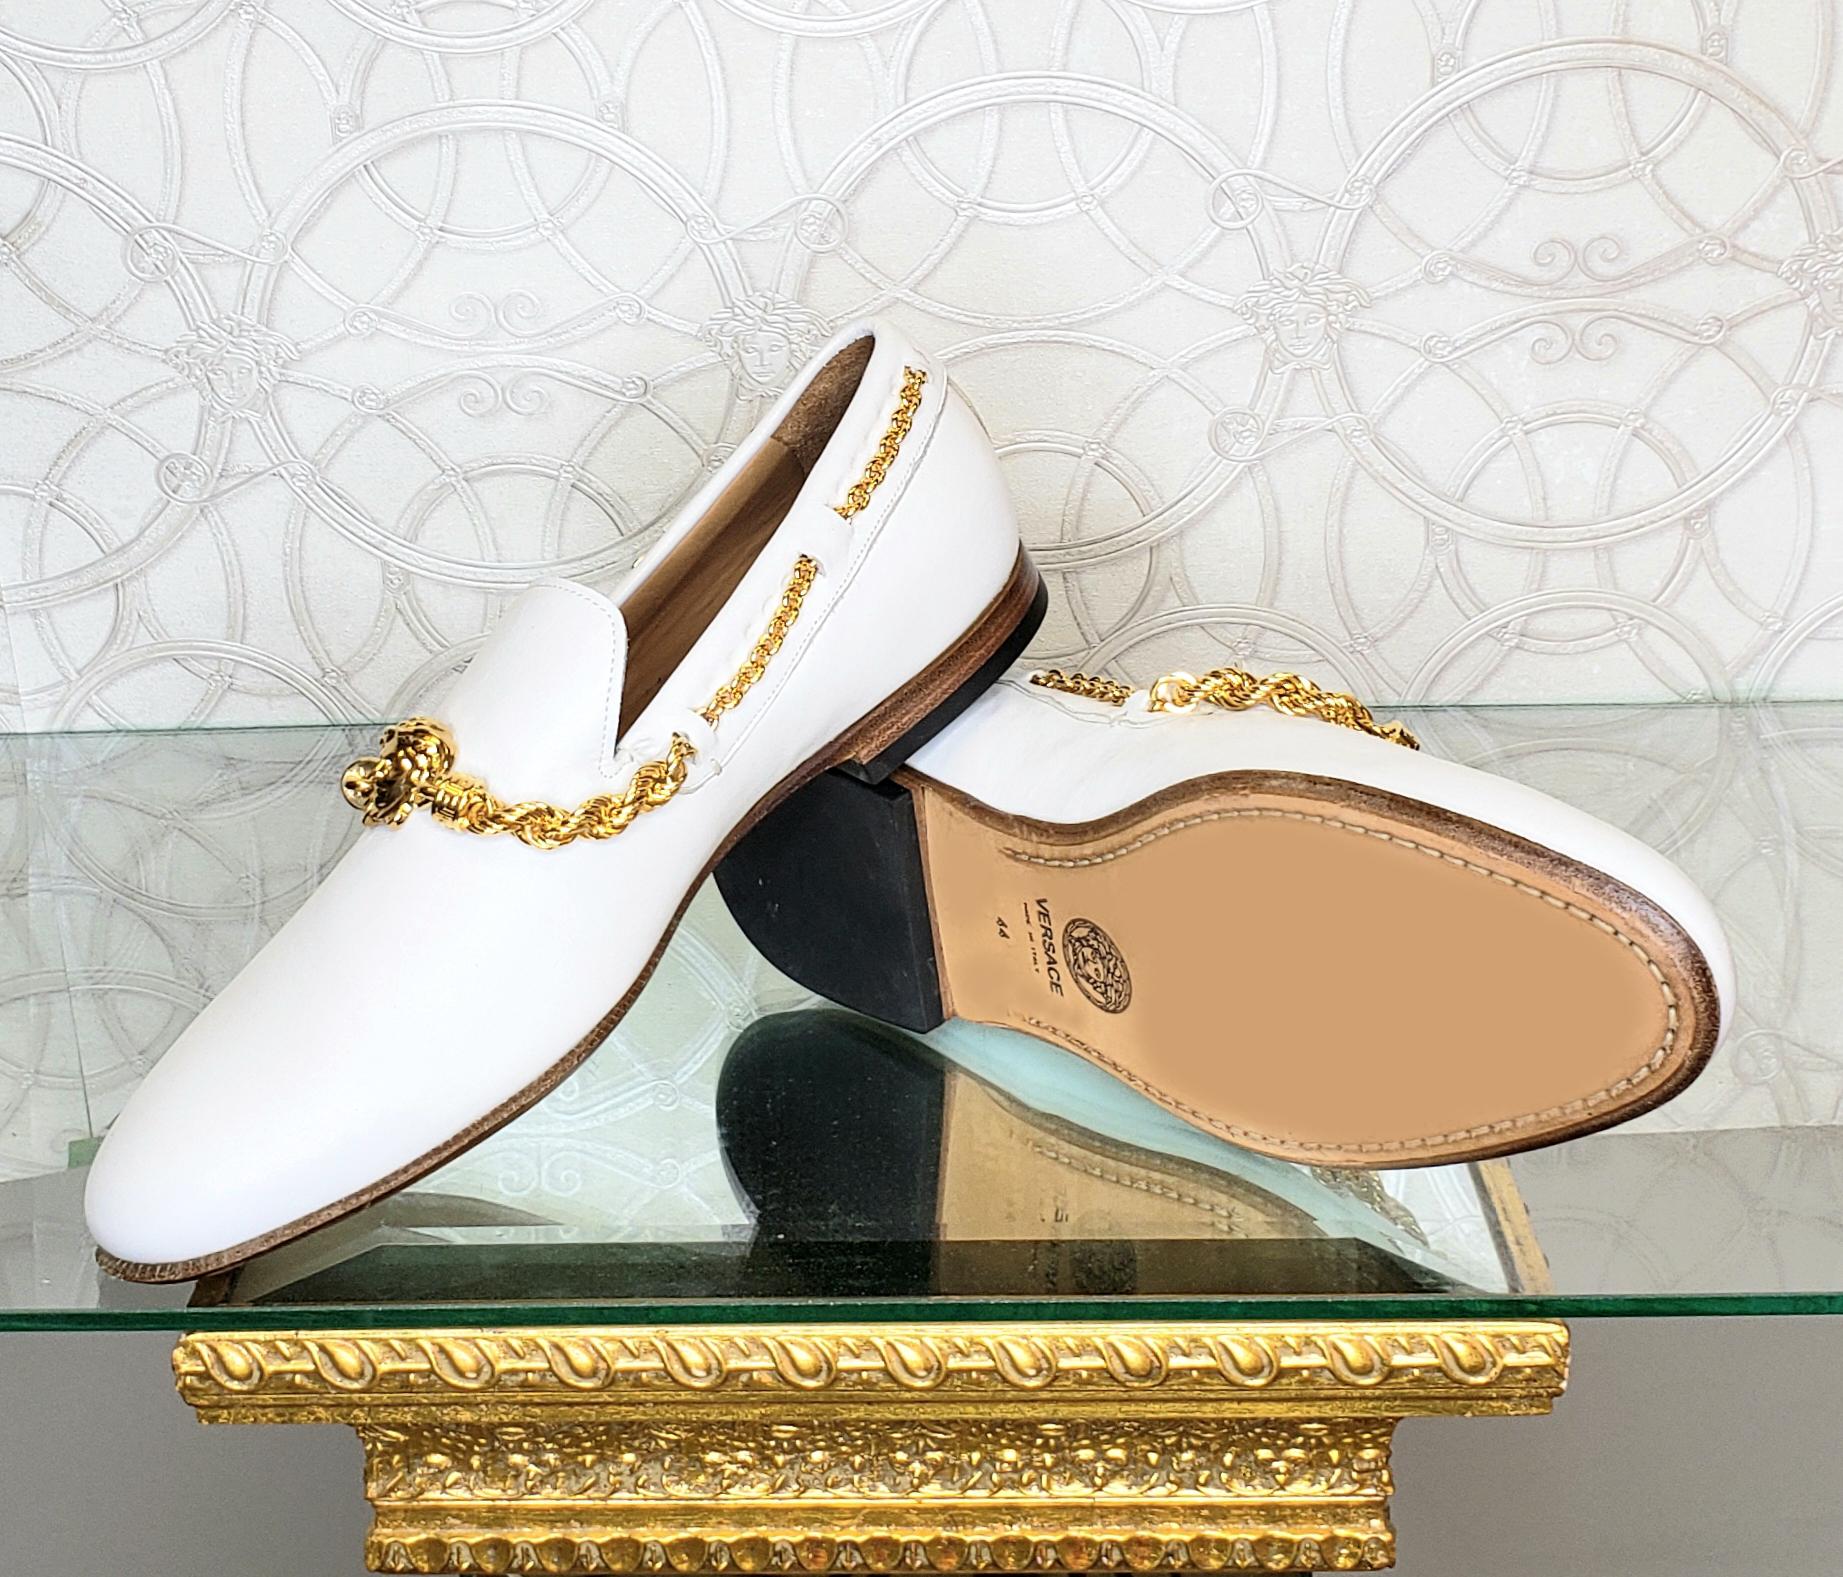 white and gold loafers mens